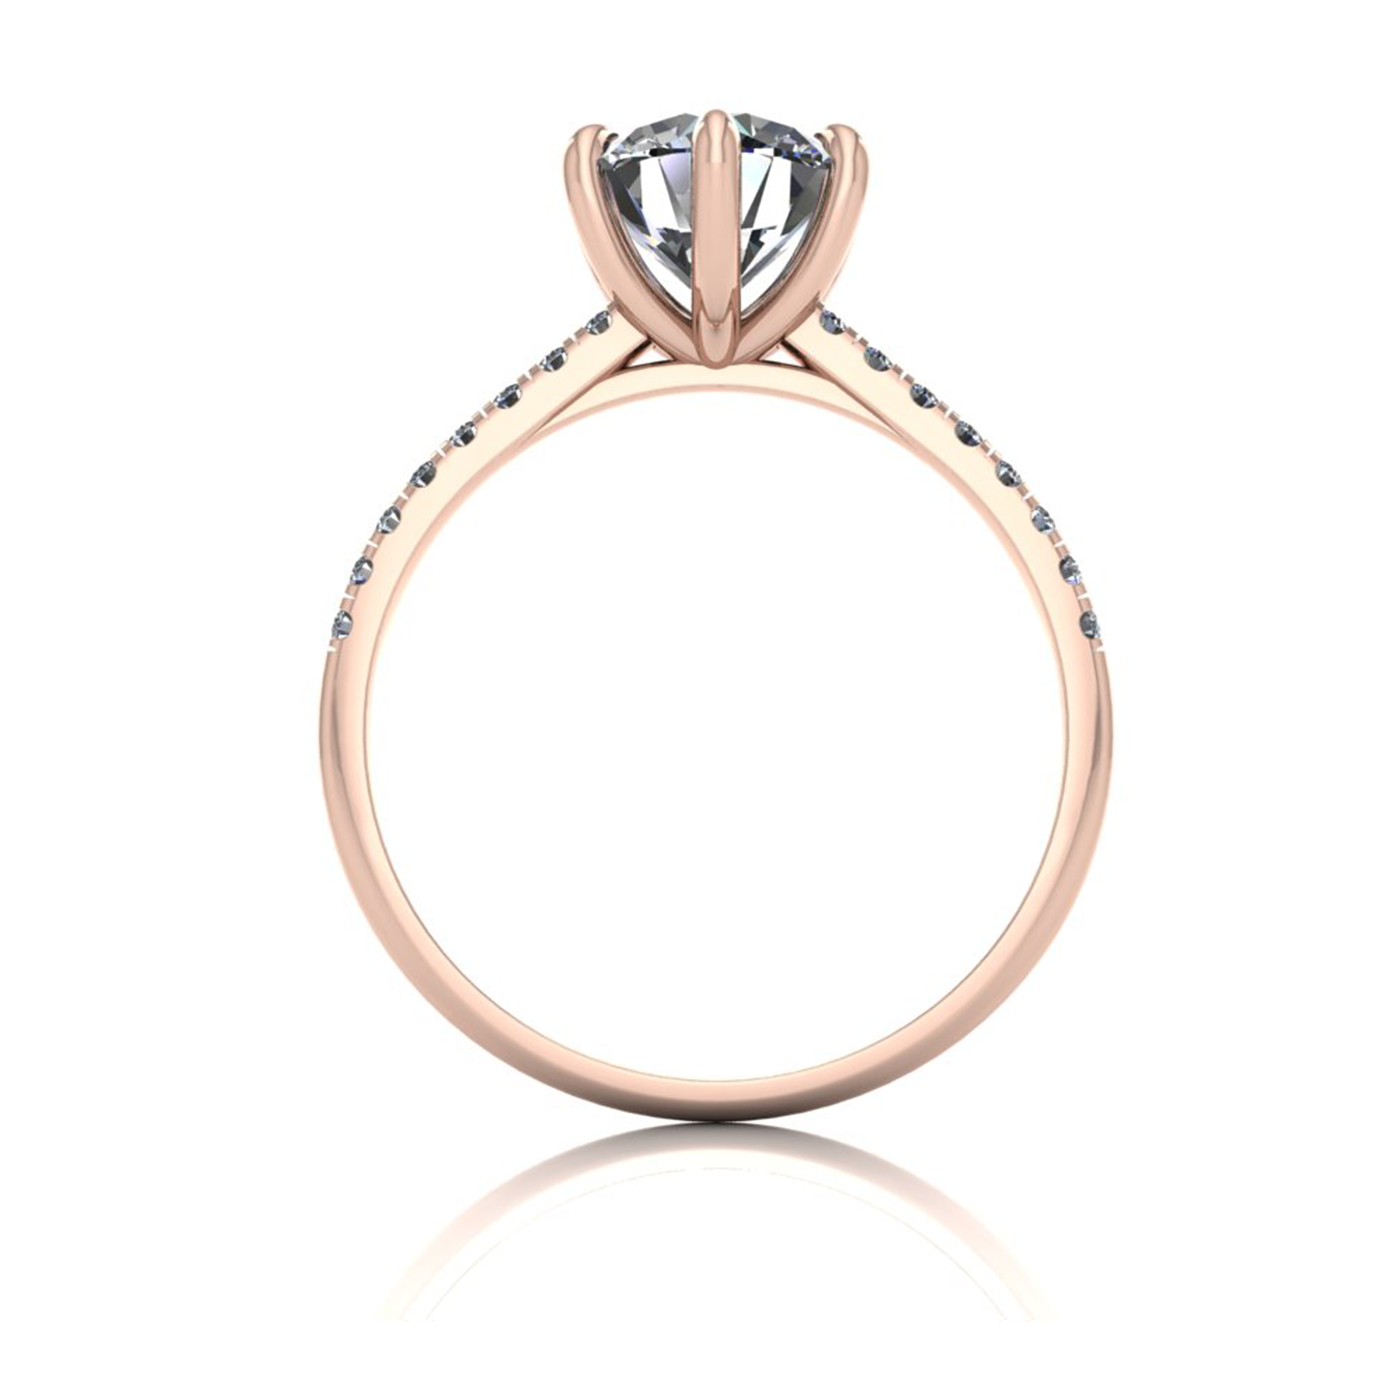 18k rose gold 1,50 ct 6 prongs round cut diamond engagement ring with whisper thin pavÉ set band